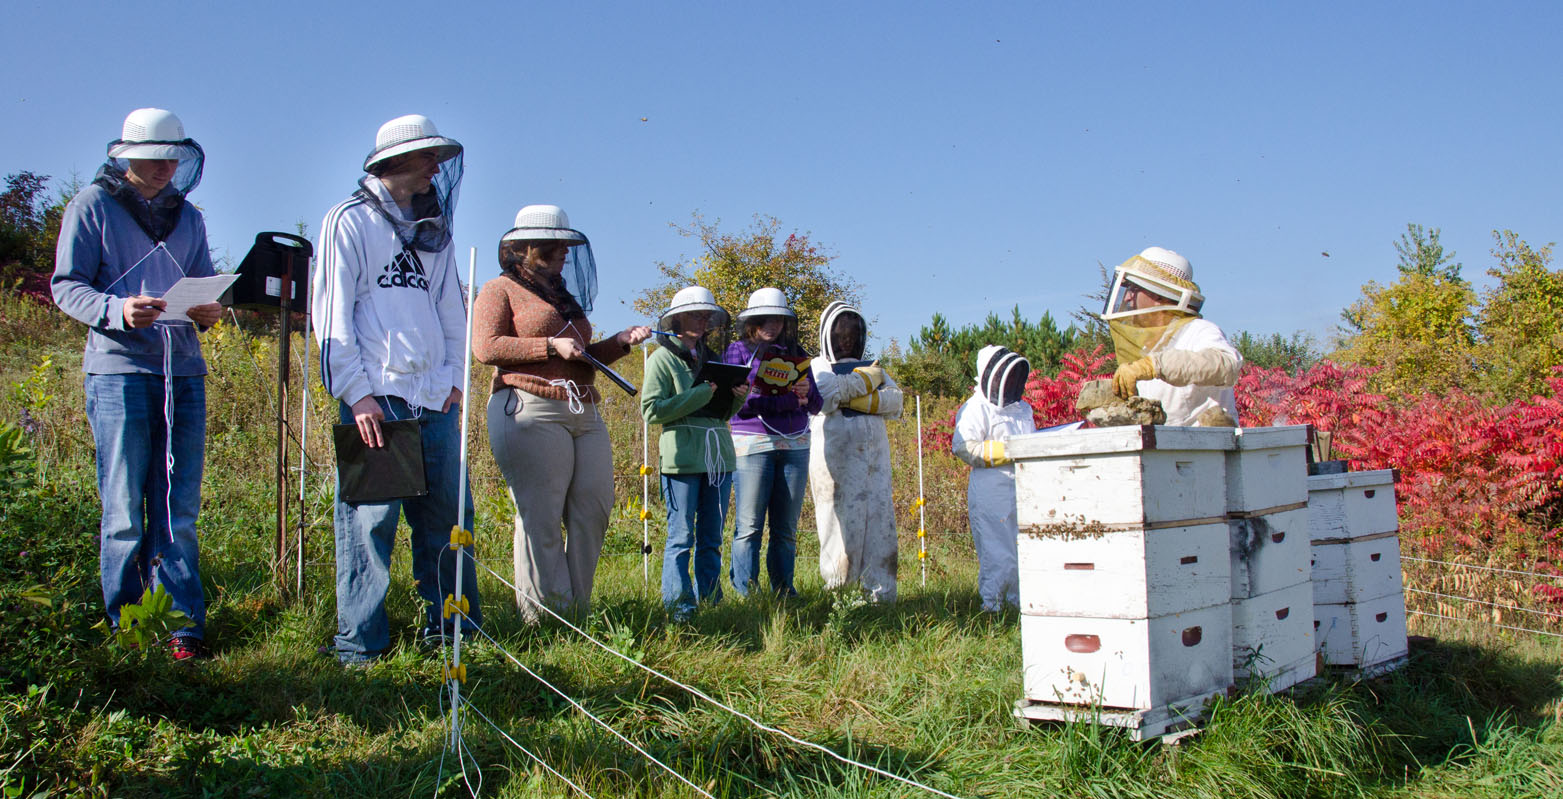 Bee class at apiary